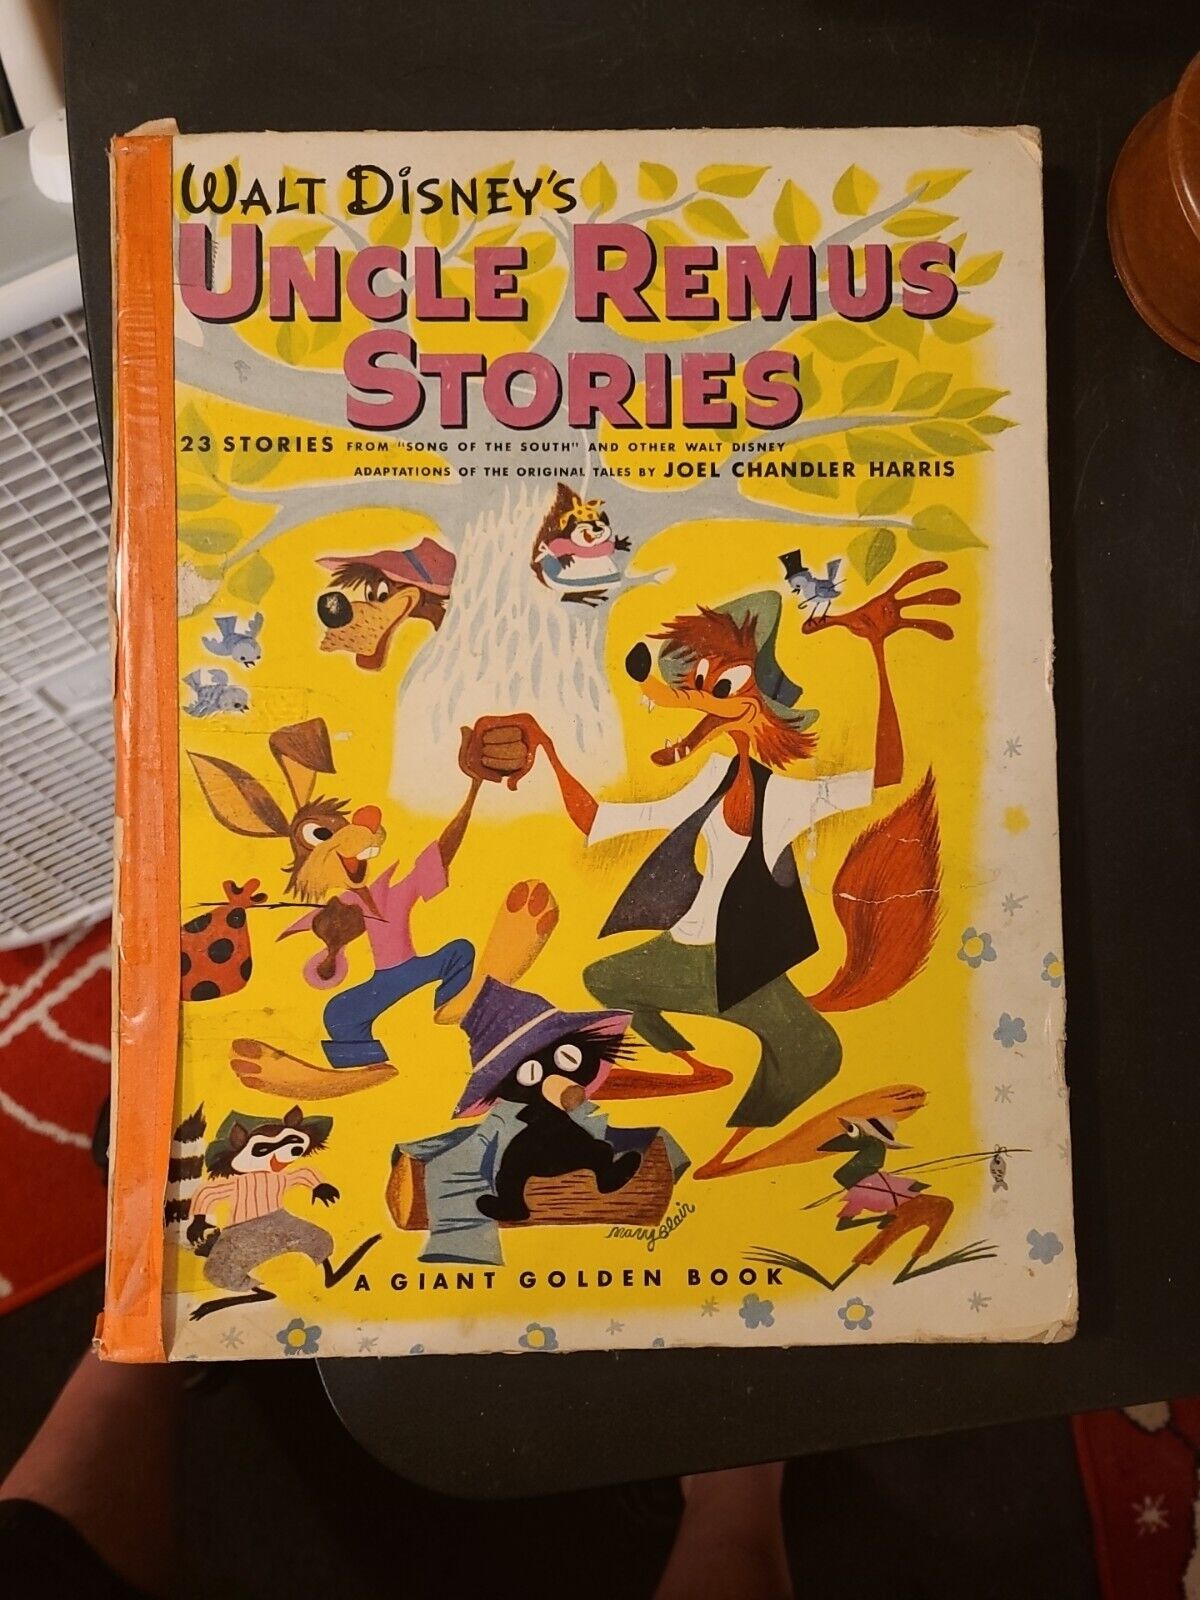 Walt Disney's Uncle Remus Stories Book Song of South 1947 Mary Blair cover art